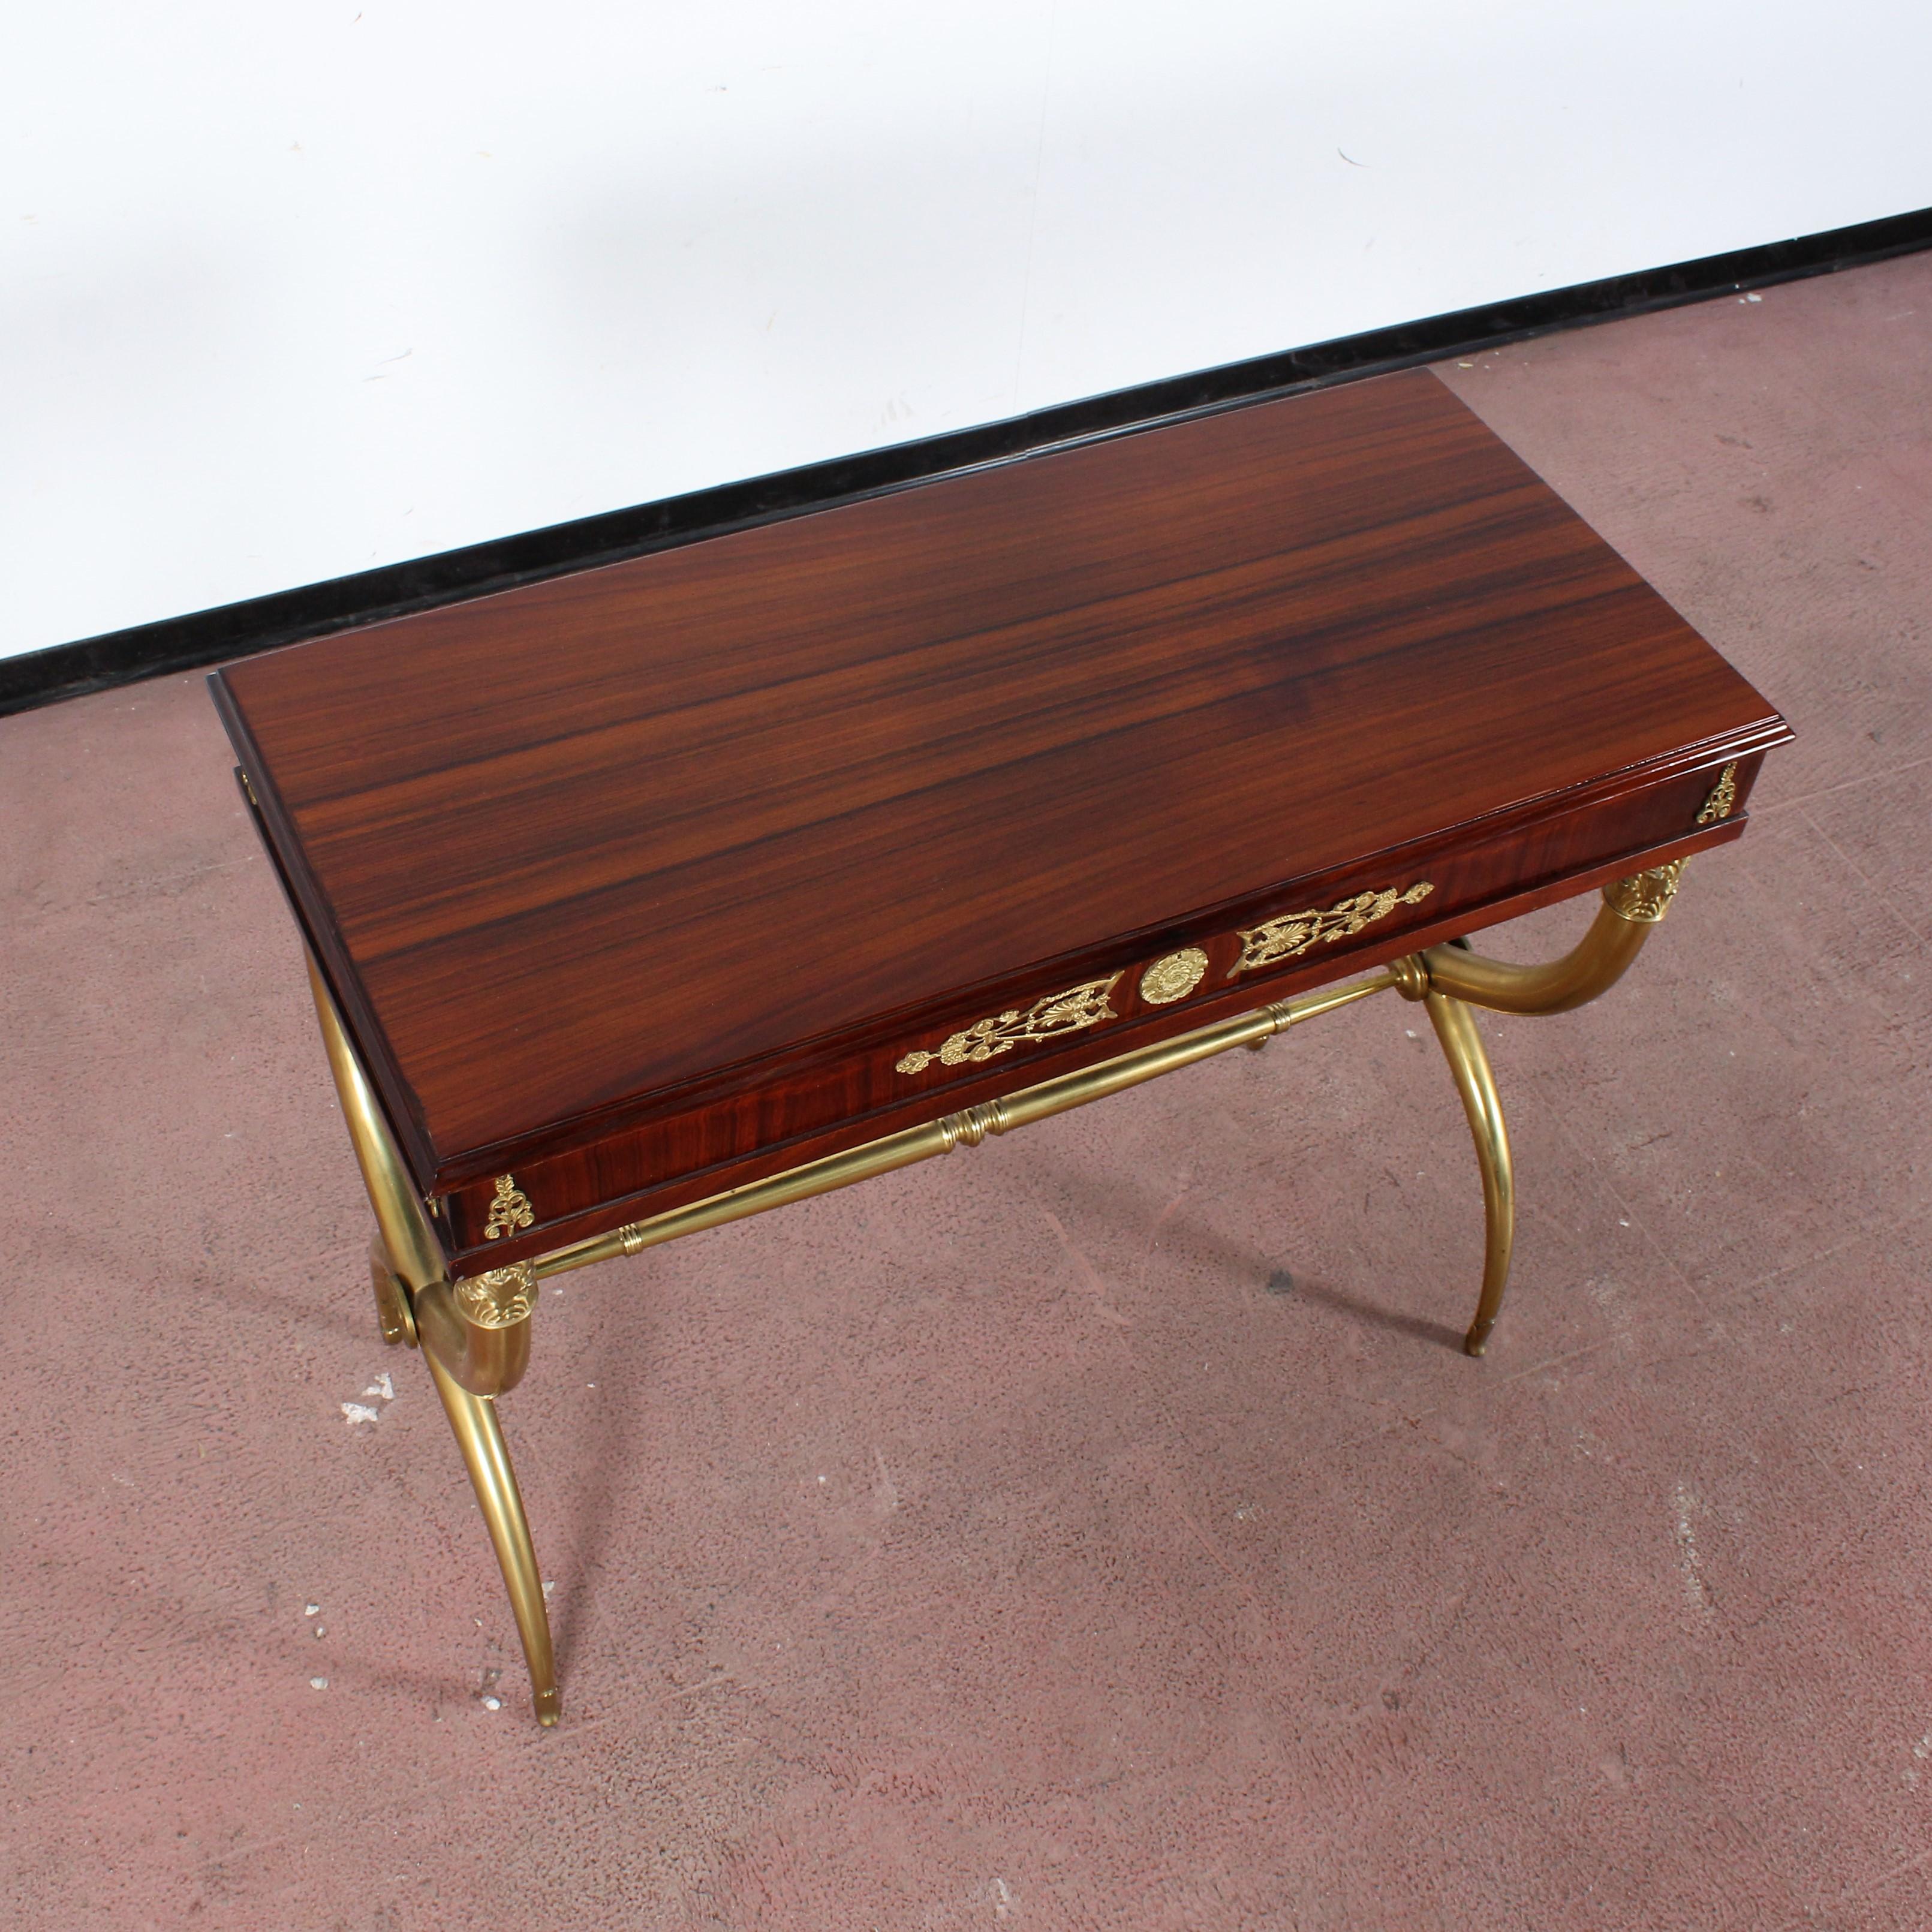 Midcentury Gio Ponti Wood and Brass Console Table with Top Container 1950s Italy 13